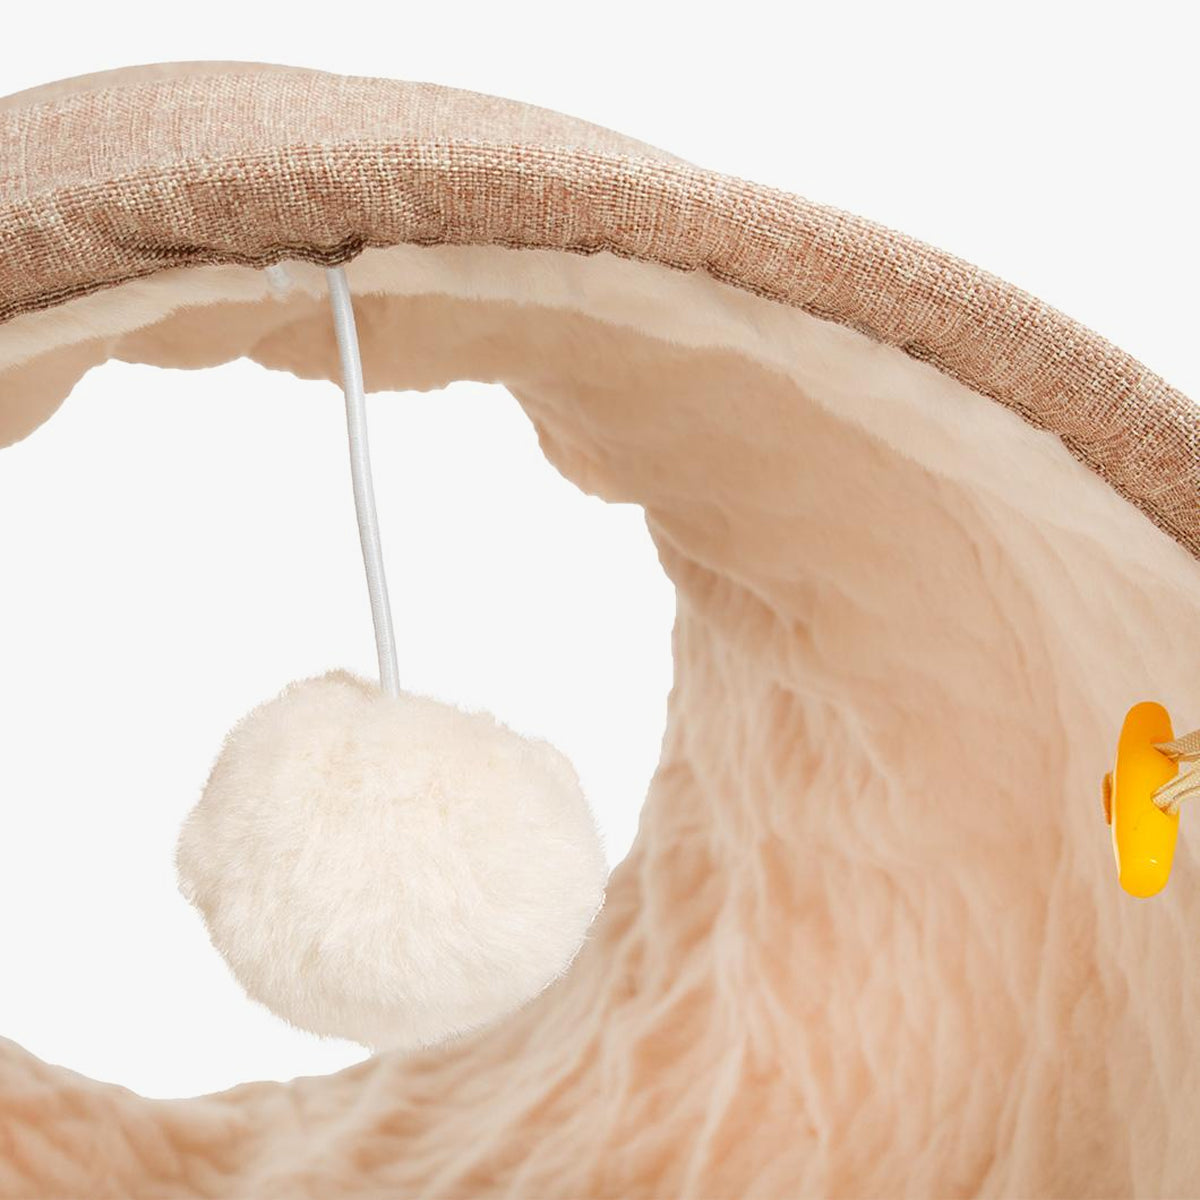 CanadianCat Collapsible Cat Tunnel, In Beige Fabric With Plush Fabric Inner | at Made Moggie